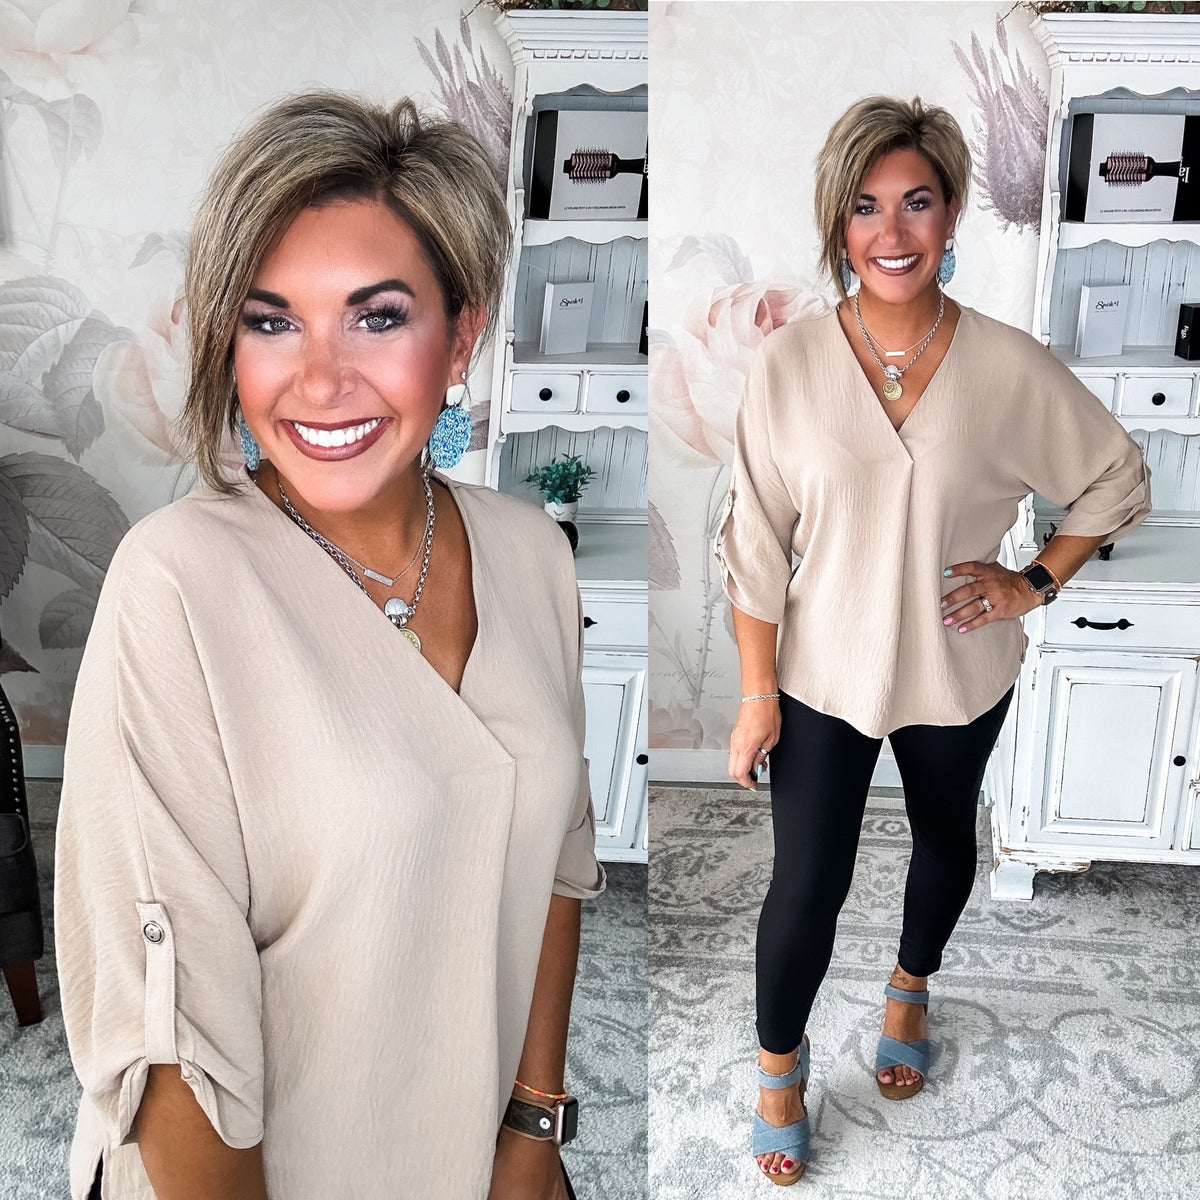 Let Me Work It Blouse - Taupe